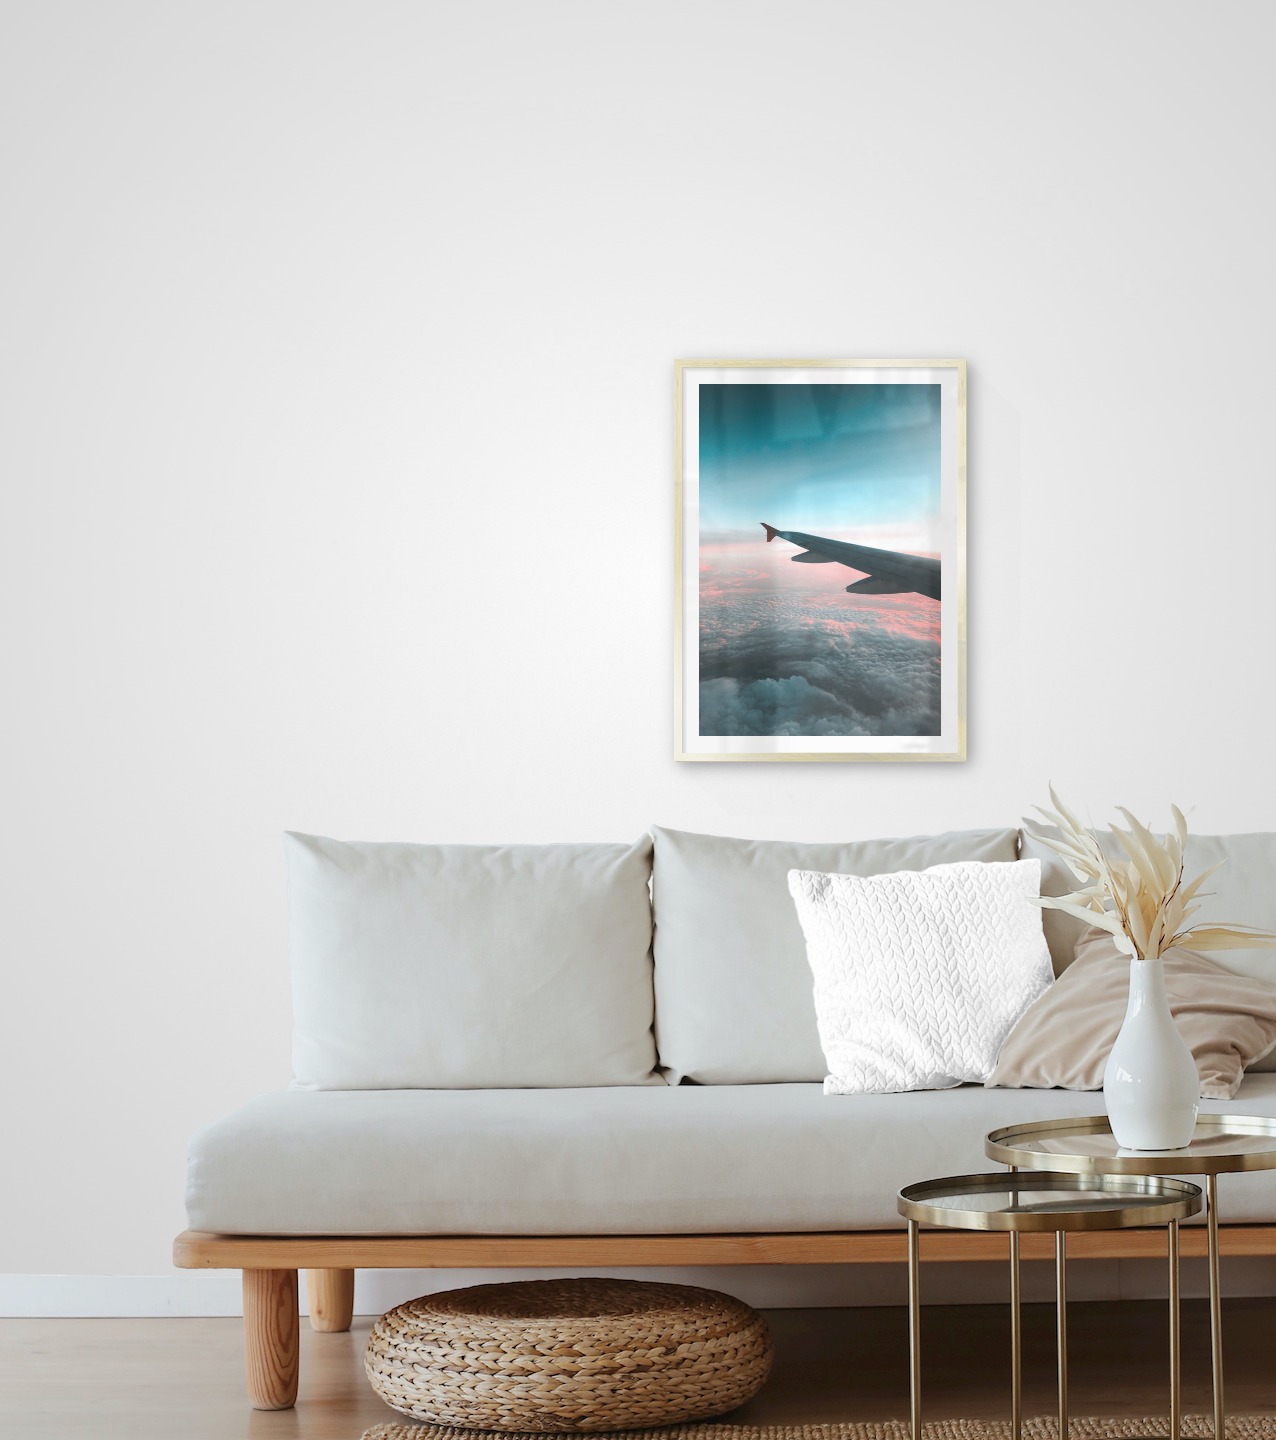 Gallery wall with picture frame in gold in size 50x70 with print "Above the clouds"